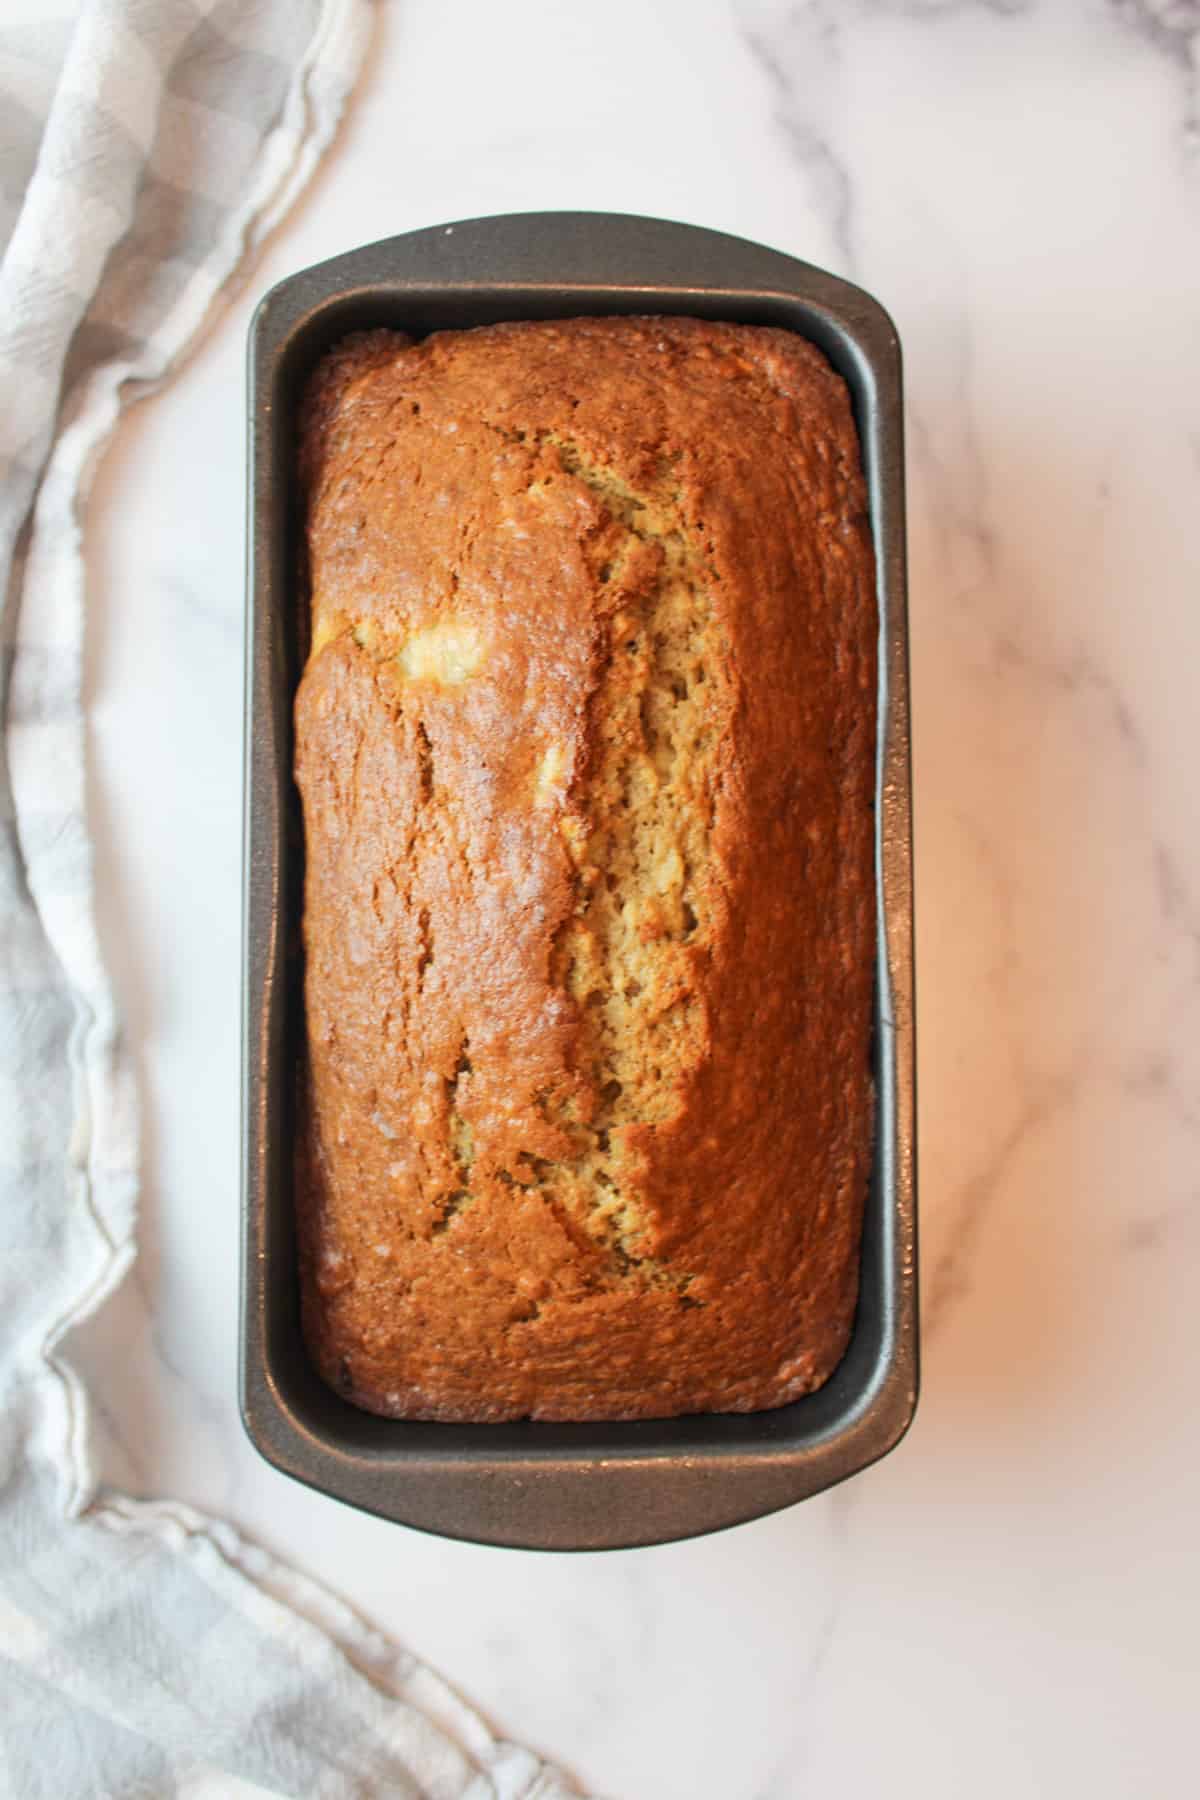 baked sour cream banana bread in a loaf pan